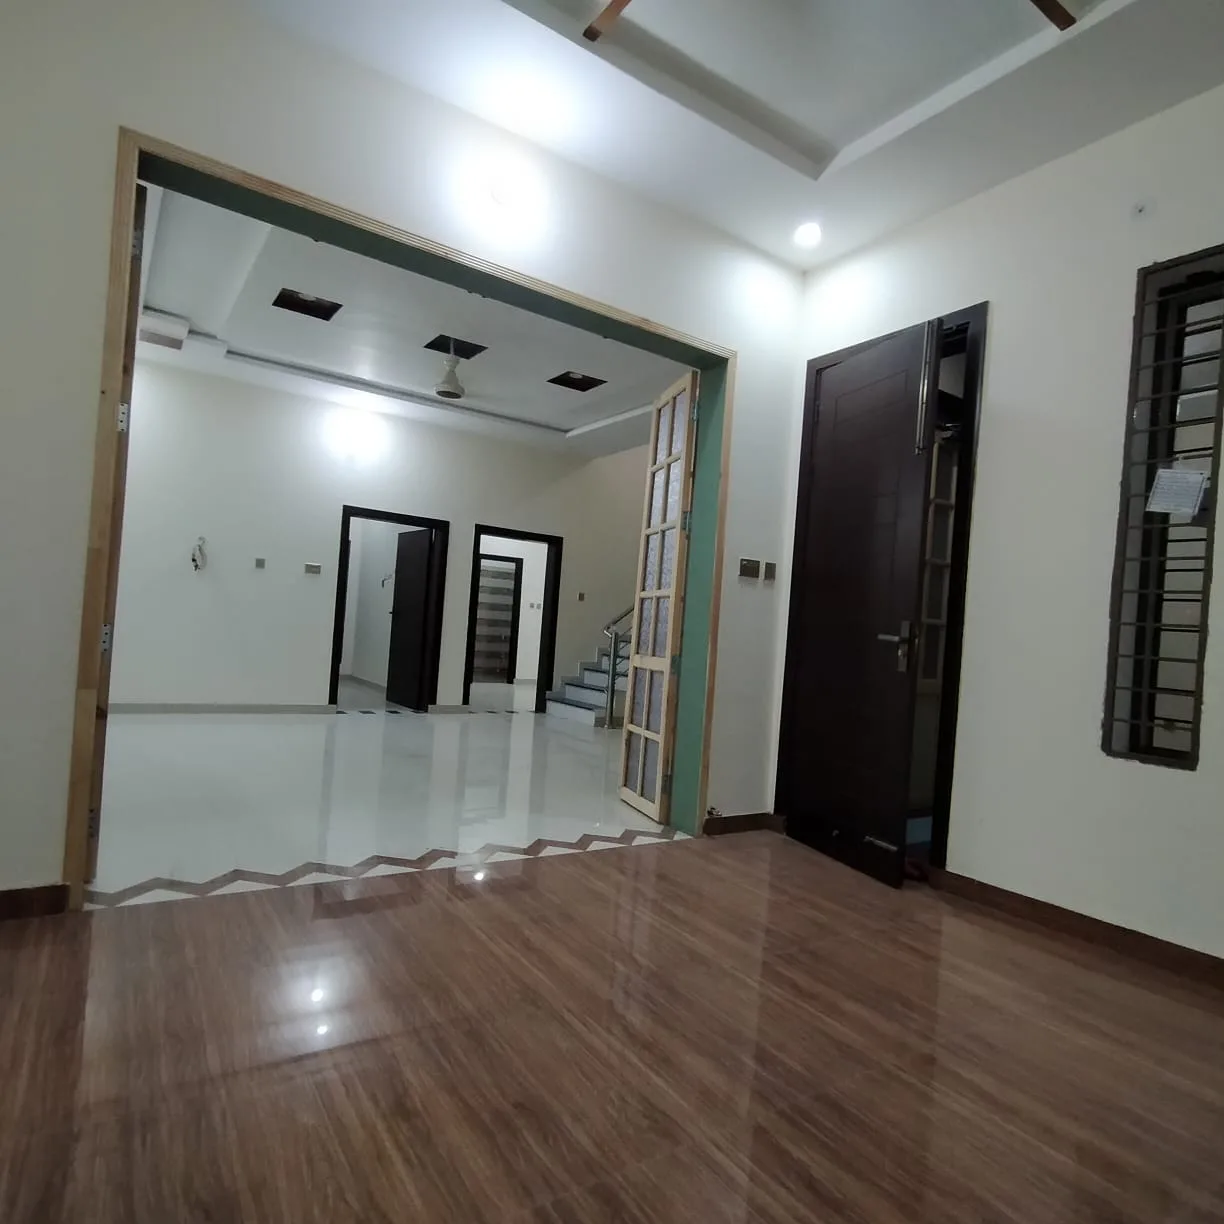 House For Rent in Nasheman Colony Sialkot